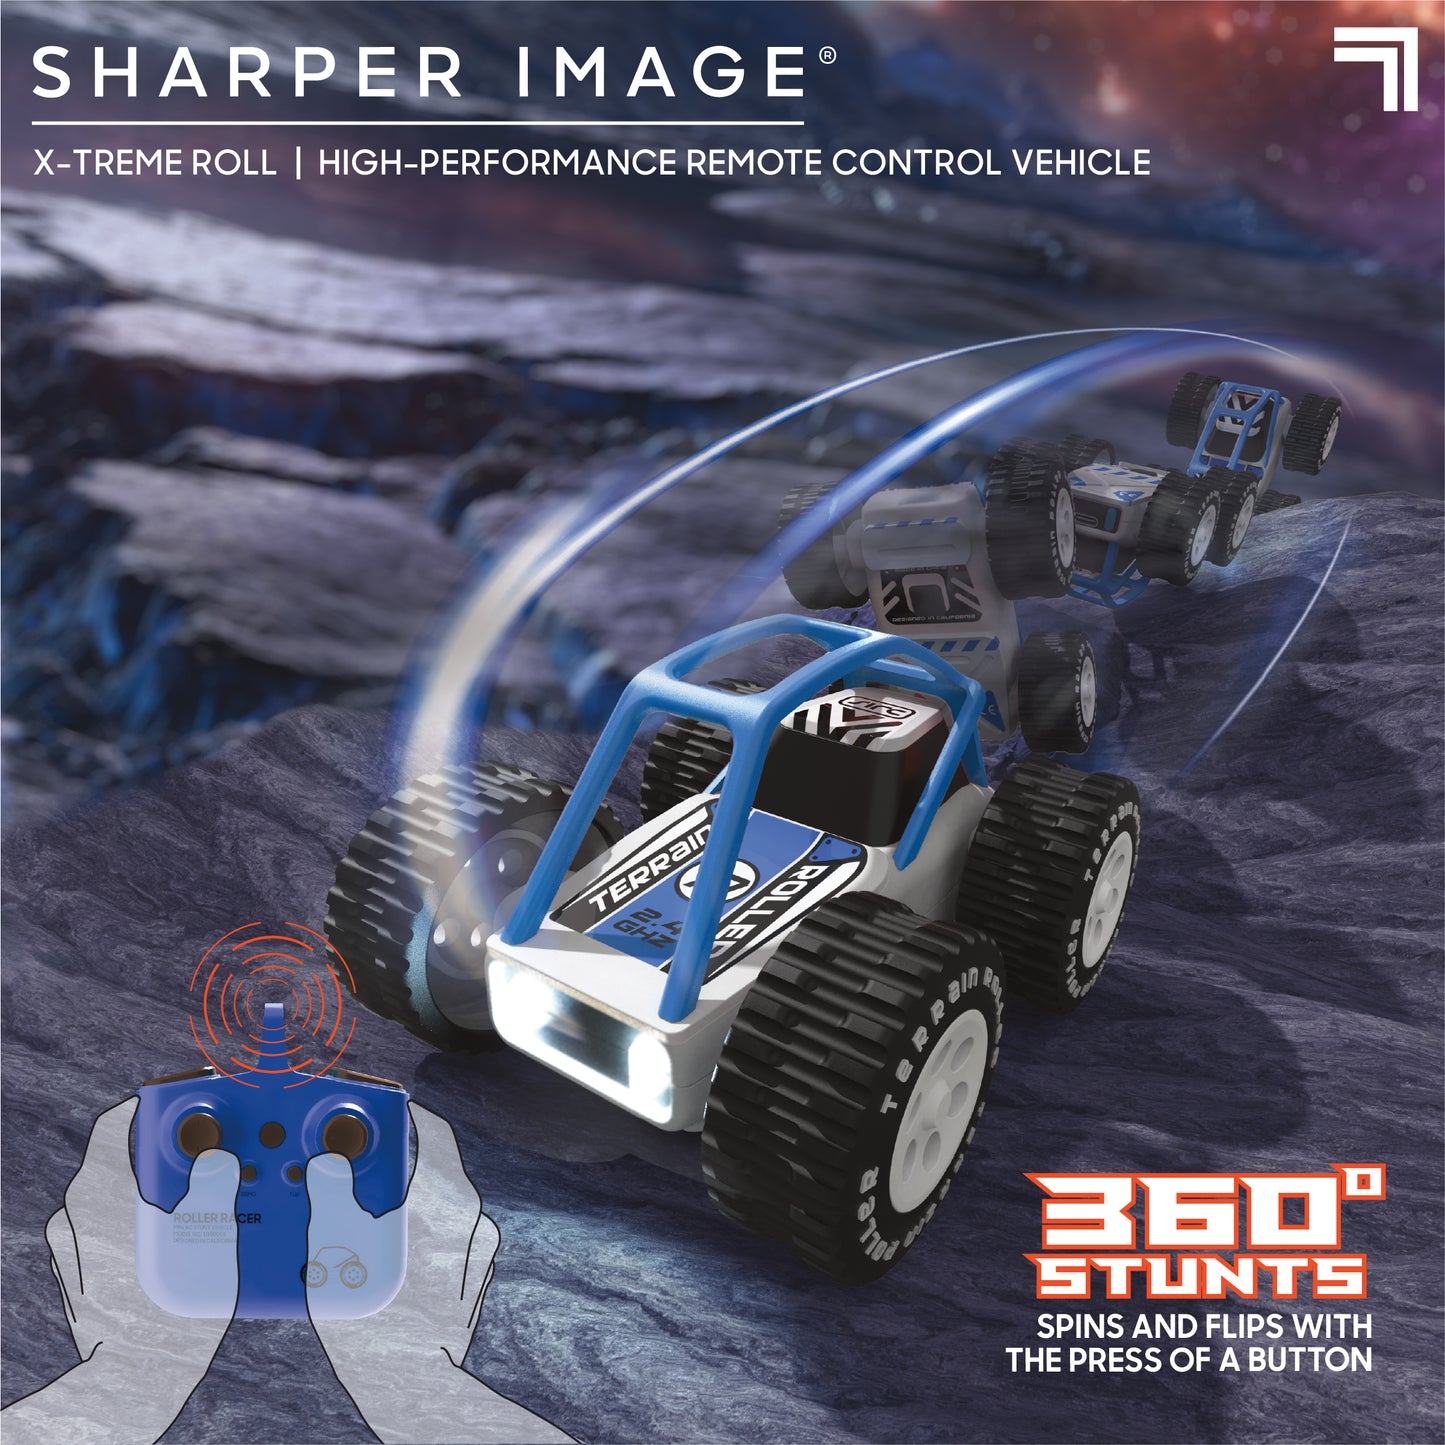 Sharper Image® Toy RC x-Treme Roll High Performance Remote Control Vehicle with 360 Stunts, Spin and Flips, All-Terrain, Age 6+, Blue